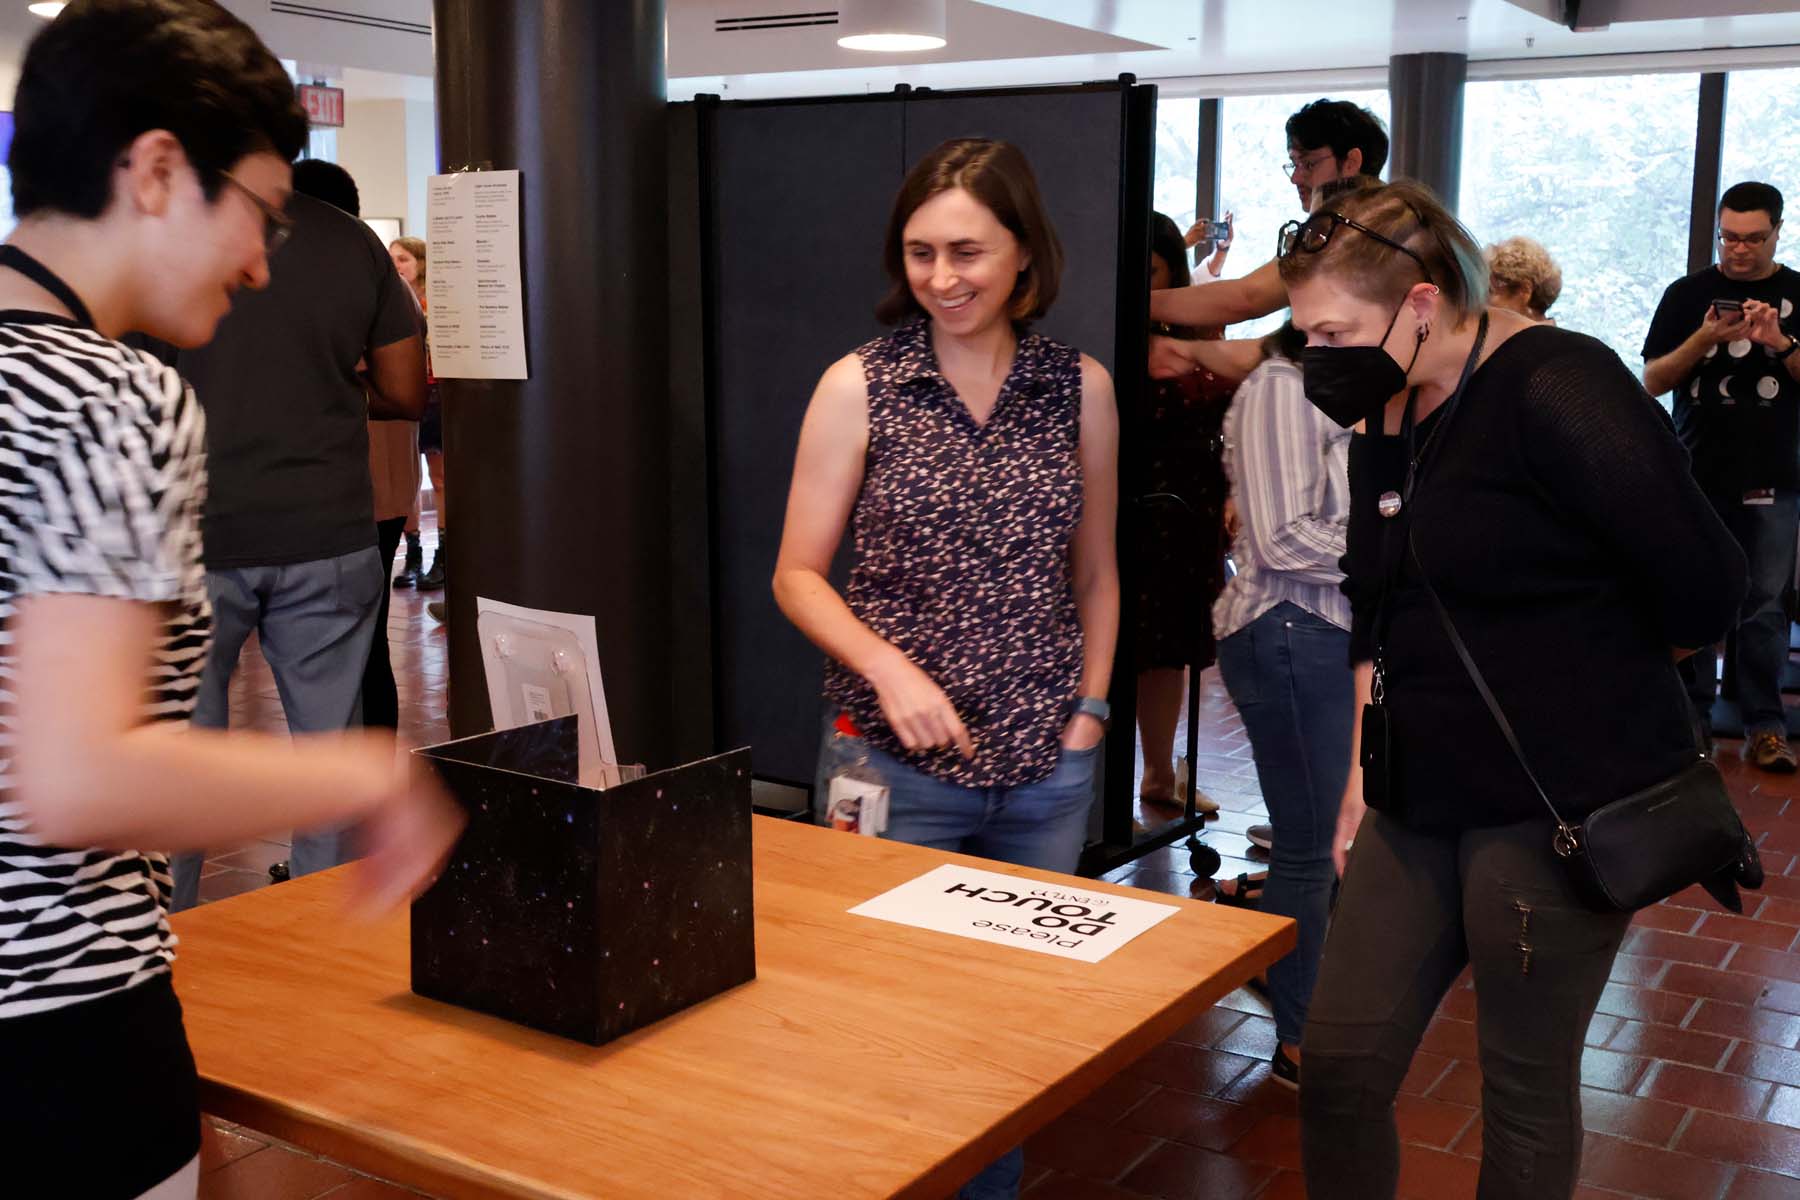 A black box sculptural piece sits on a table labeled “Please DO TOUCH (GENTLY)”. Two viewers are smiling, leaning in to look at the piece and speak with the artist, who is shown with her back to the camera.